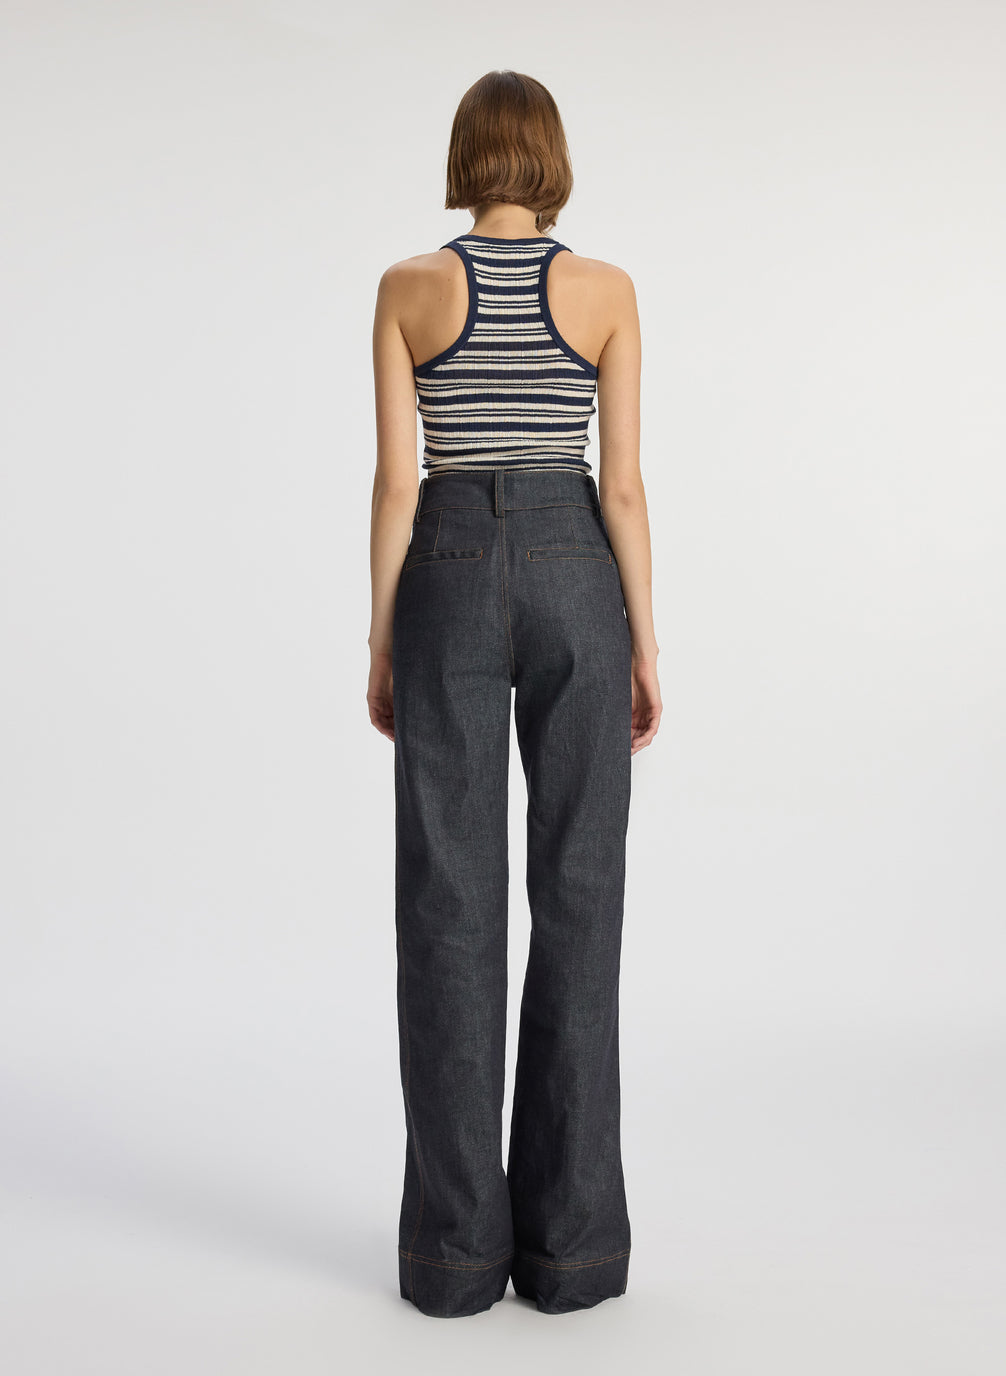 back view of woman wearing navy blue striped tank top and dark wash raw denim jeans